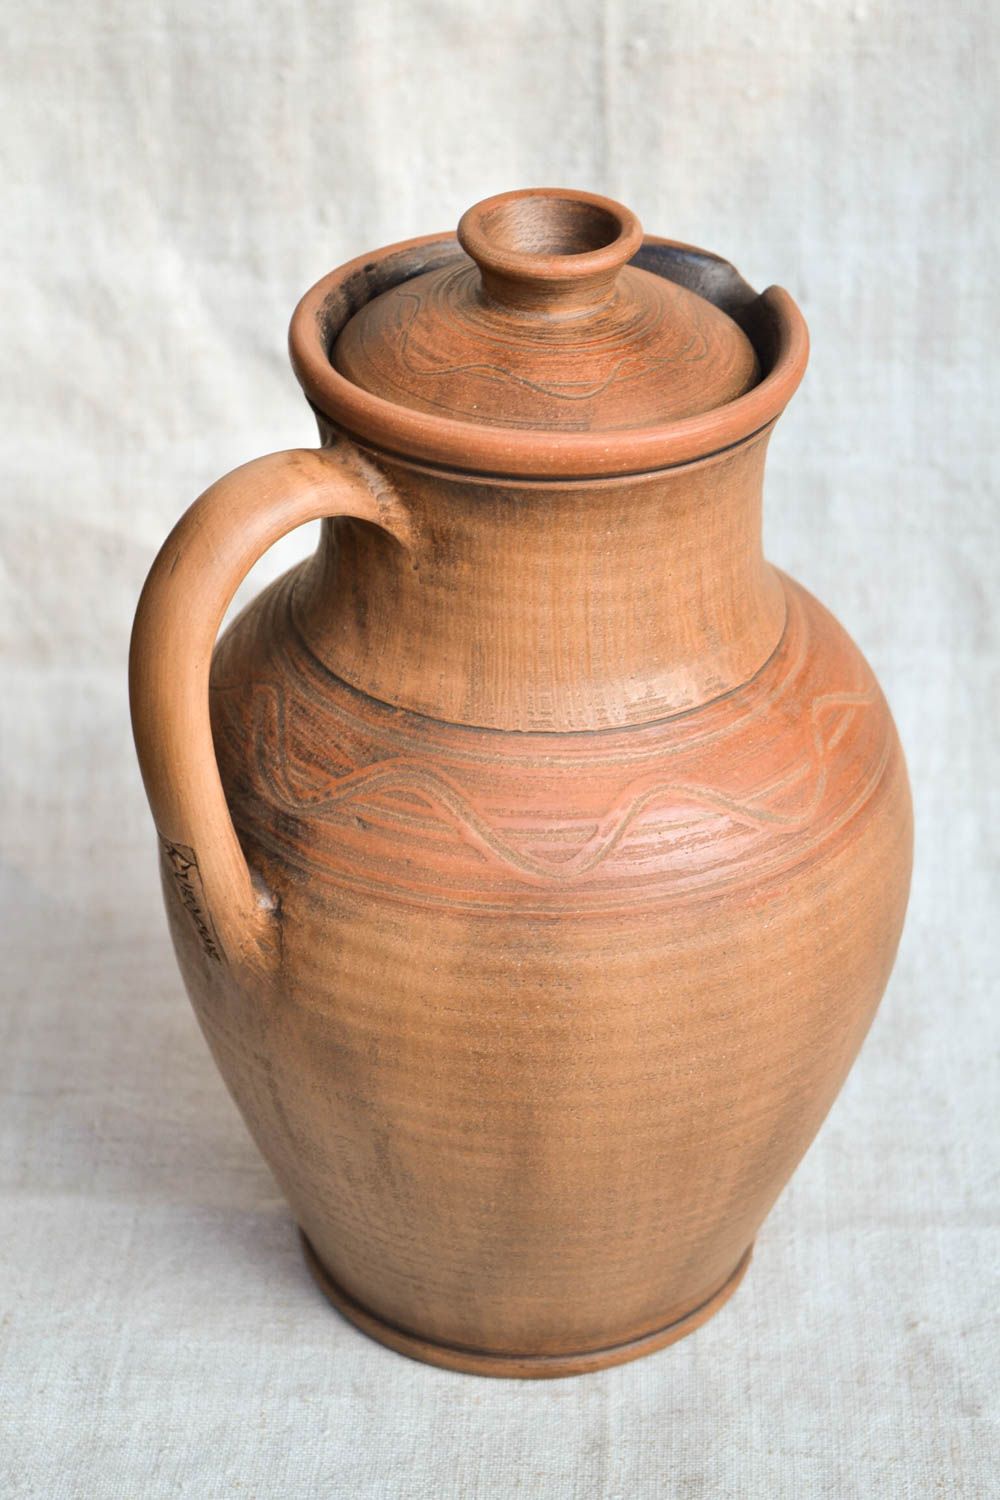 90 oz ceramic wine pitcher with handle and lid in terracotta color 2,4 lb photo 5